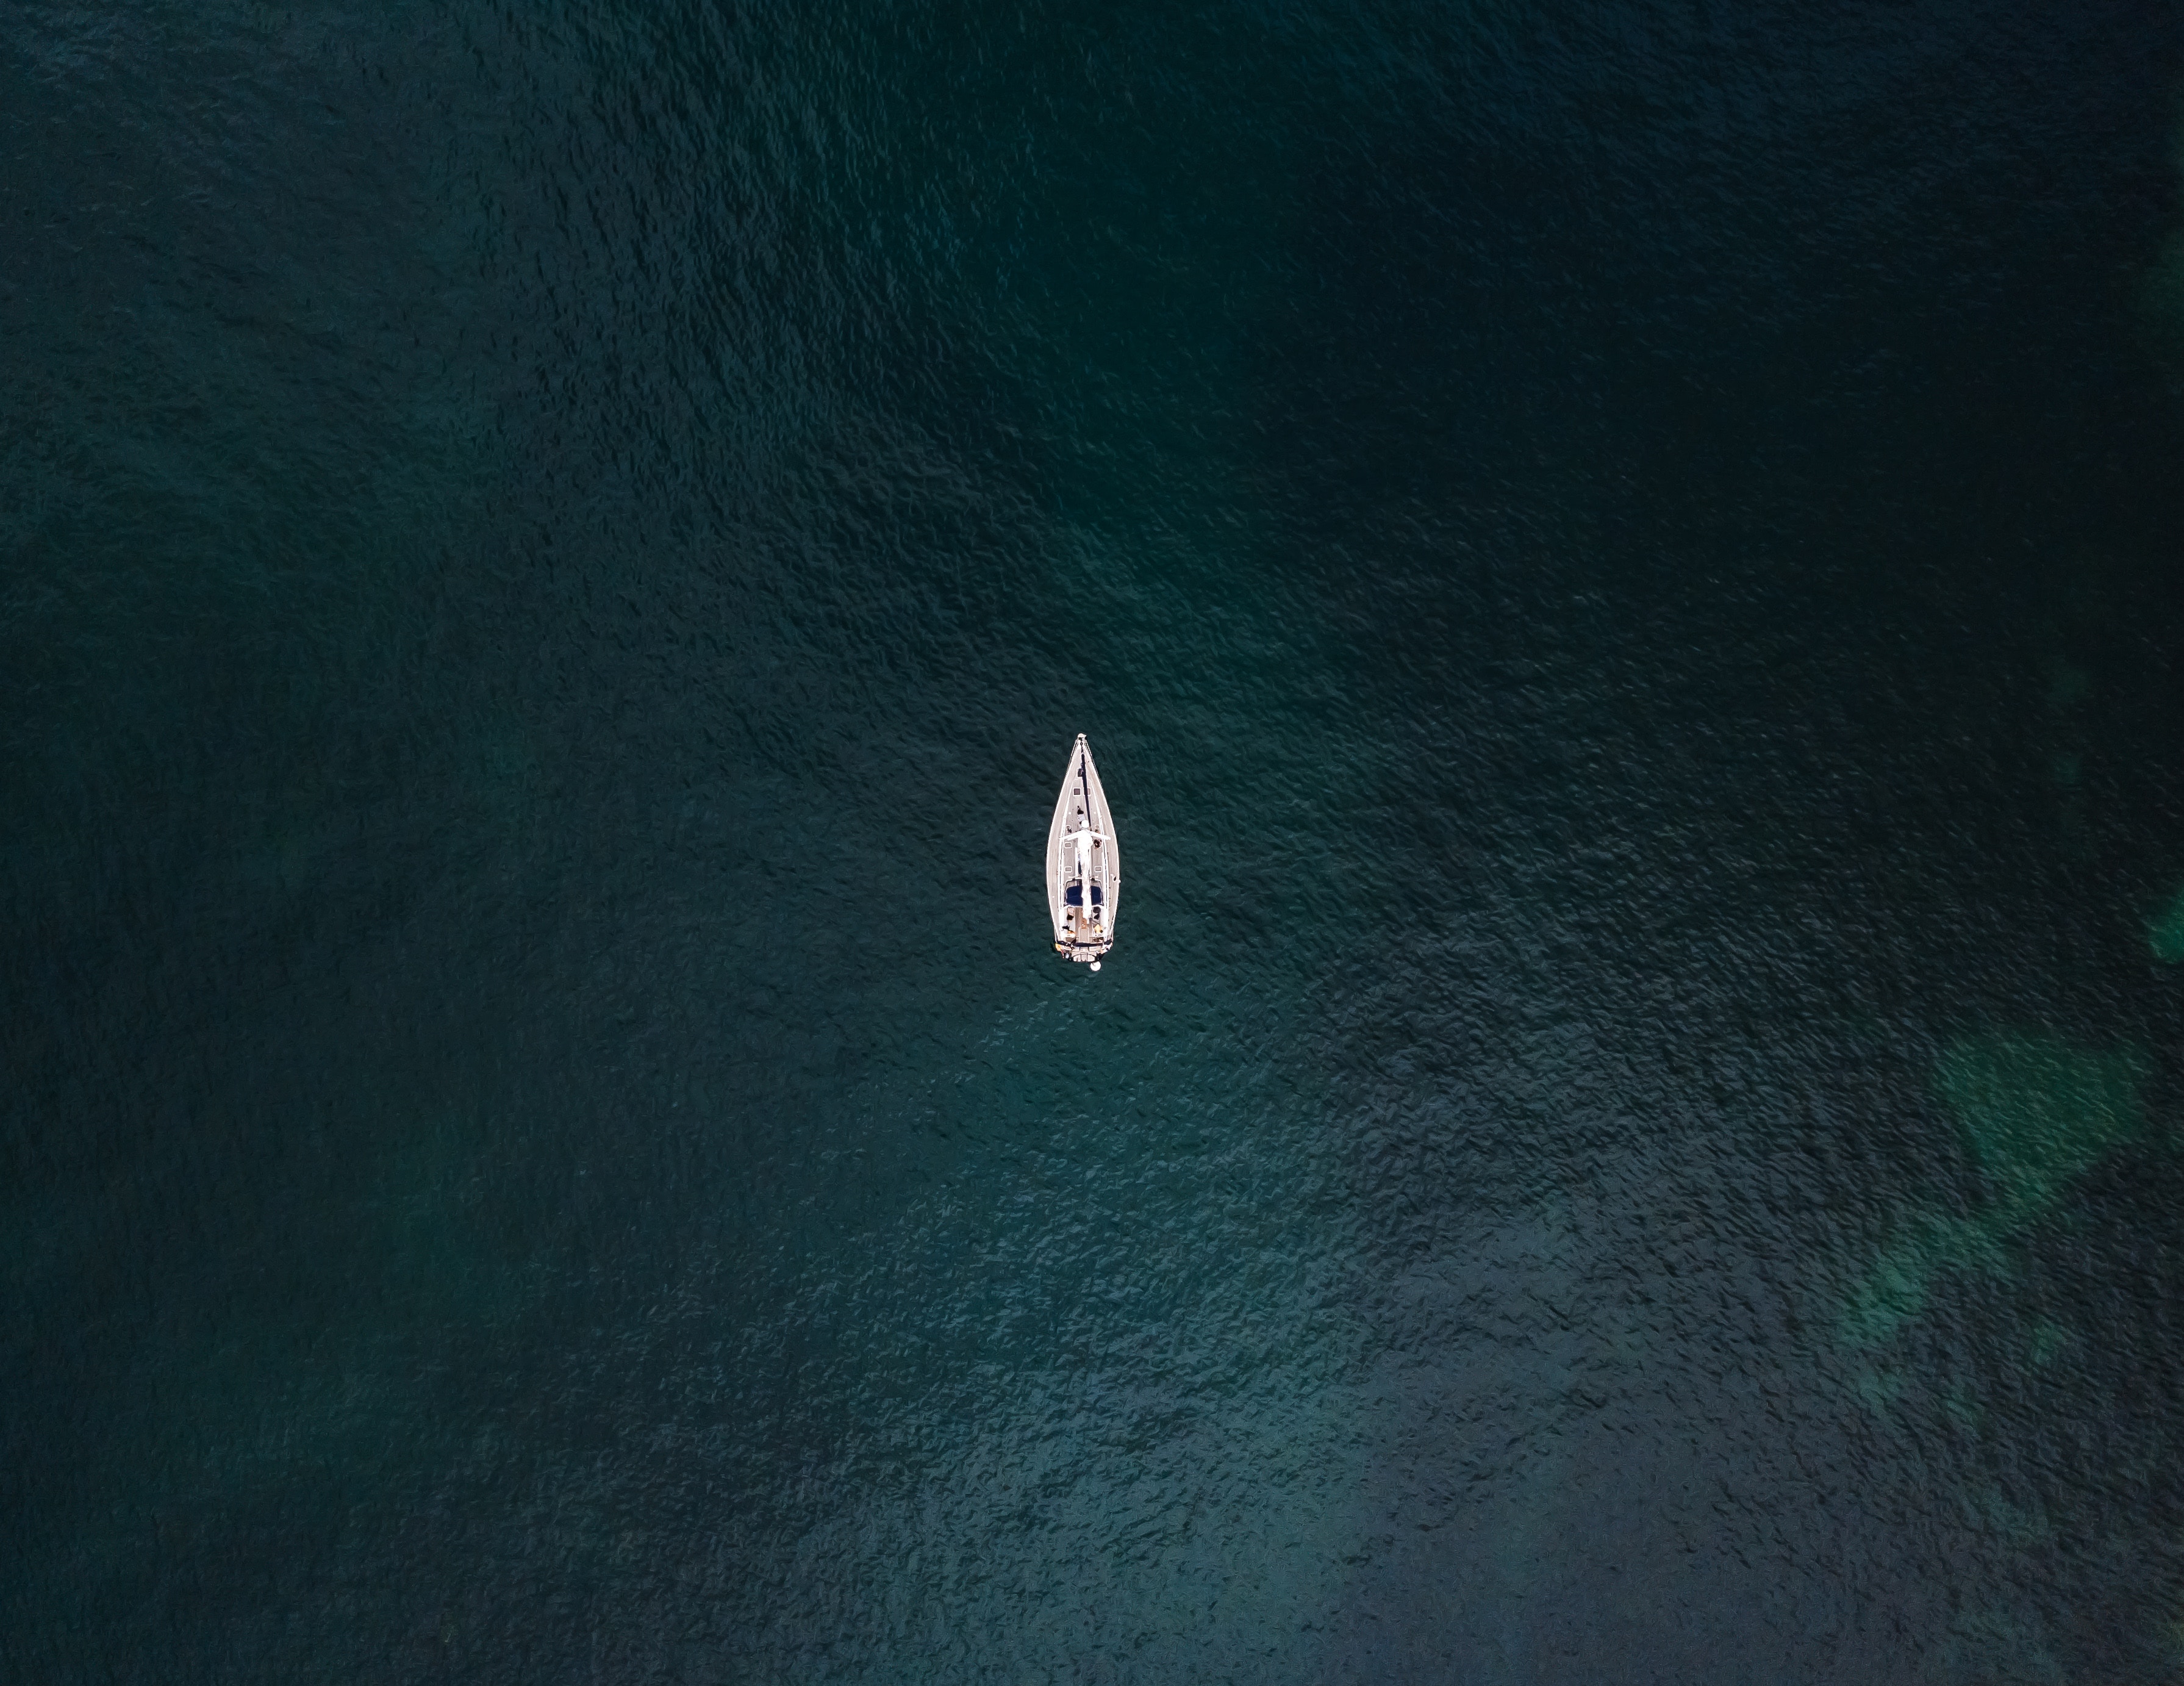 surface, yacht, water, sea, view from above, miscellanea, miscellaneous cell phone wallpapers